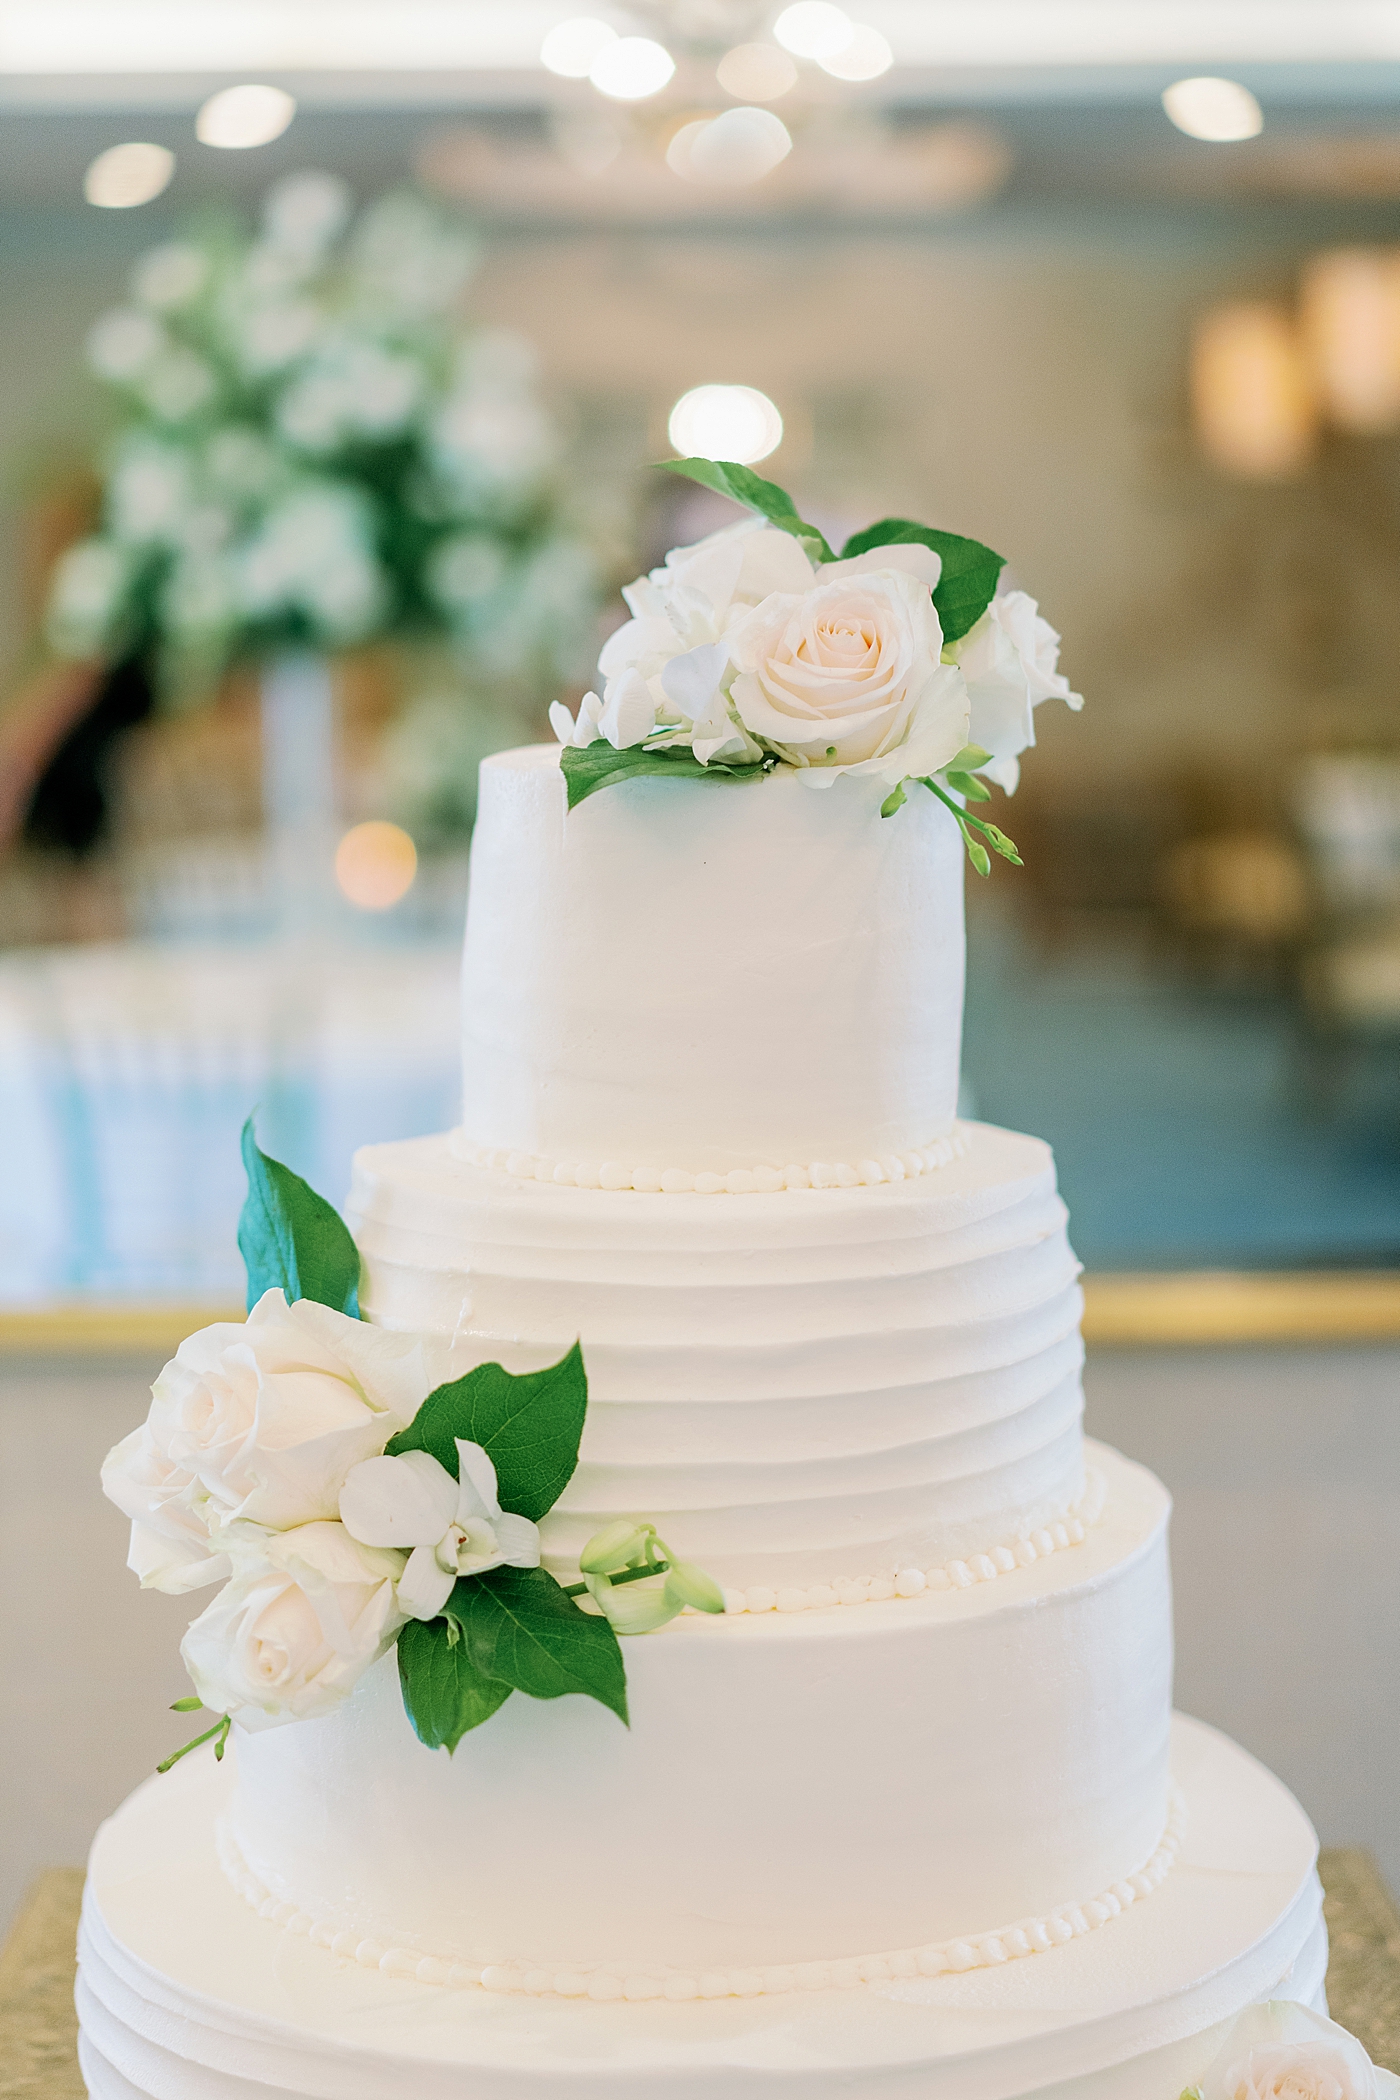 Details of wedding cake decorated with flowers | Image by Annie Laura Photo